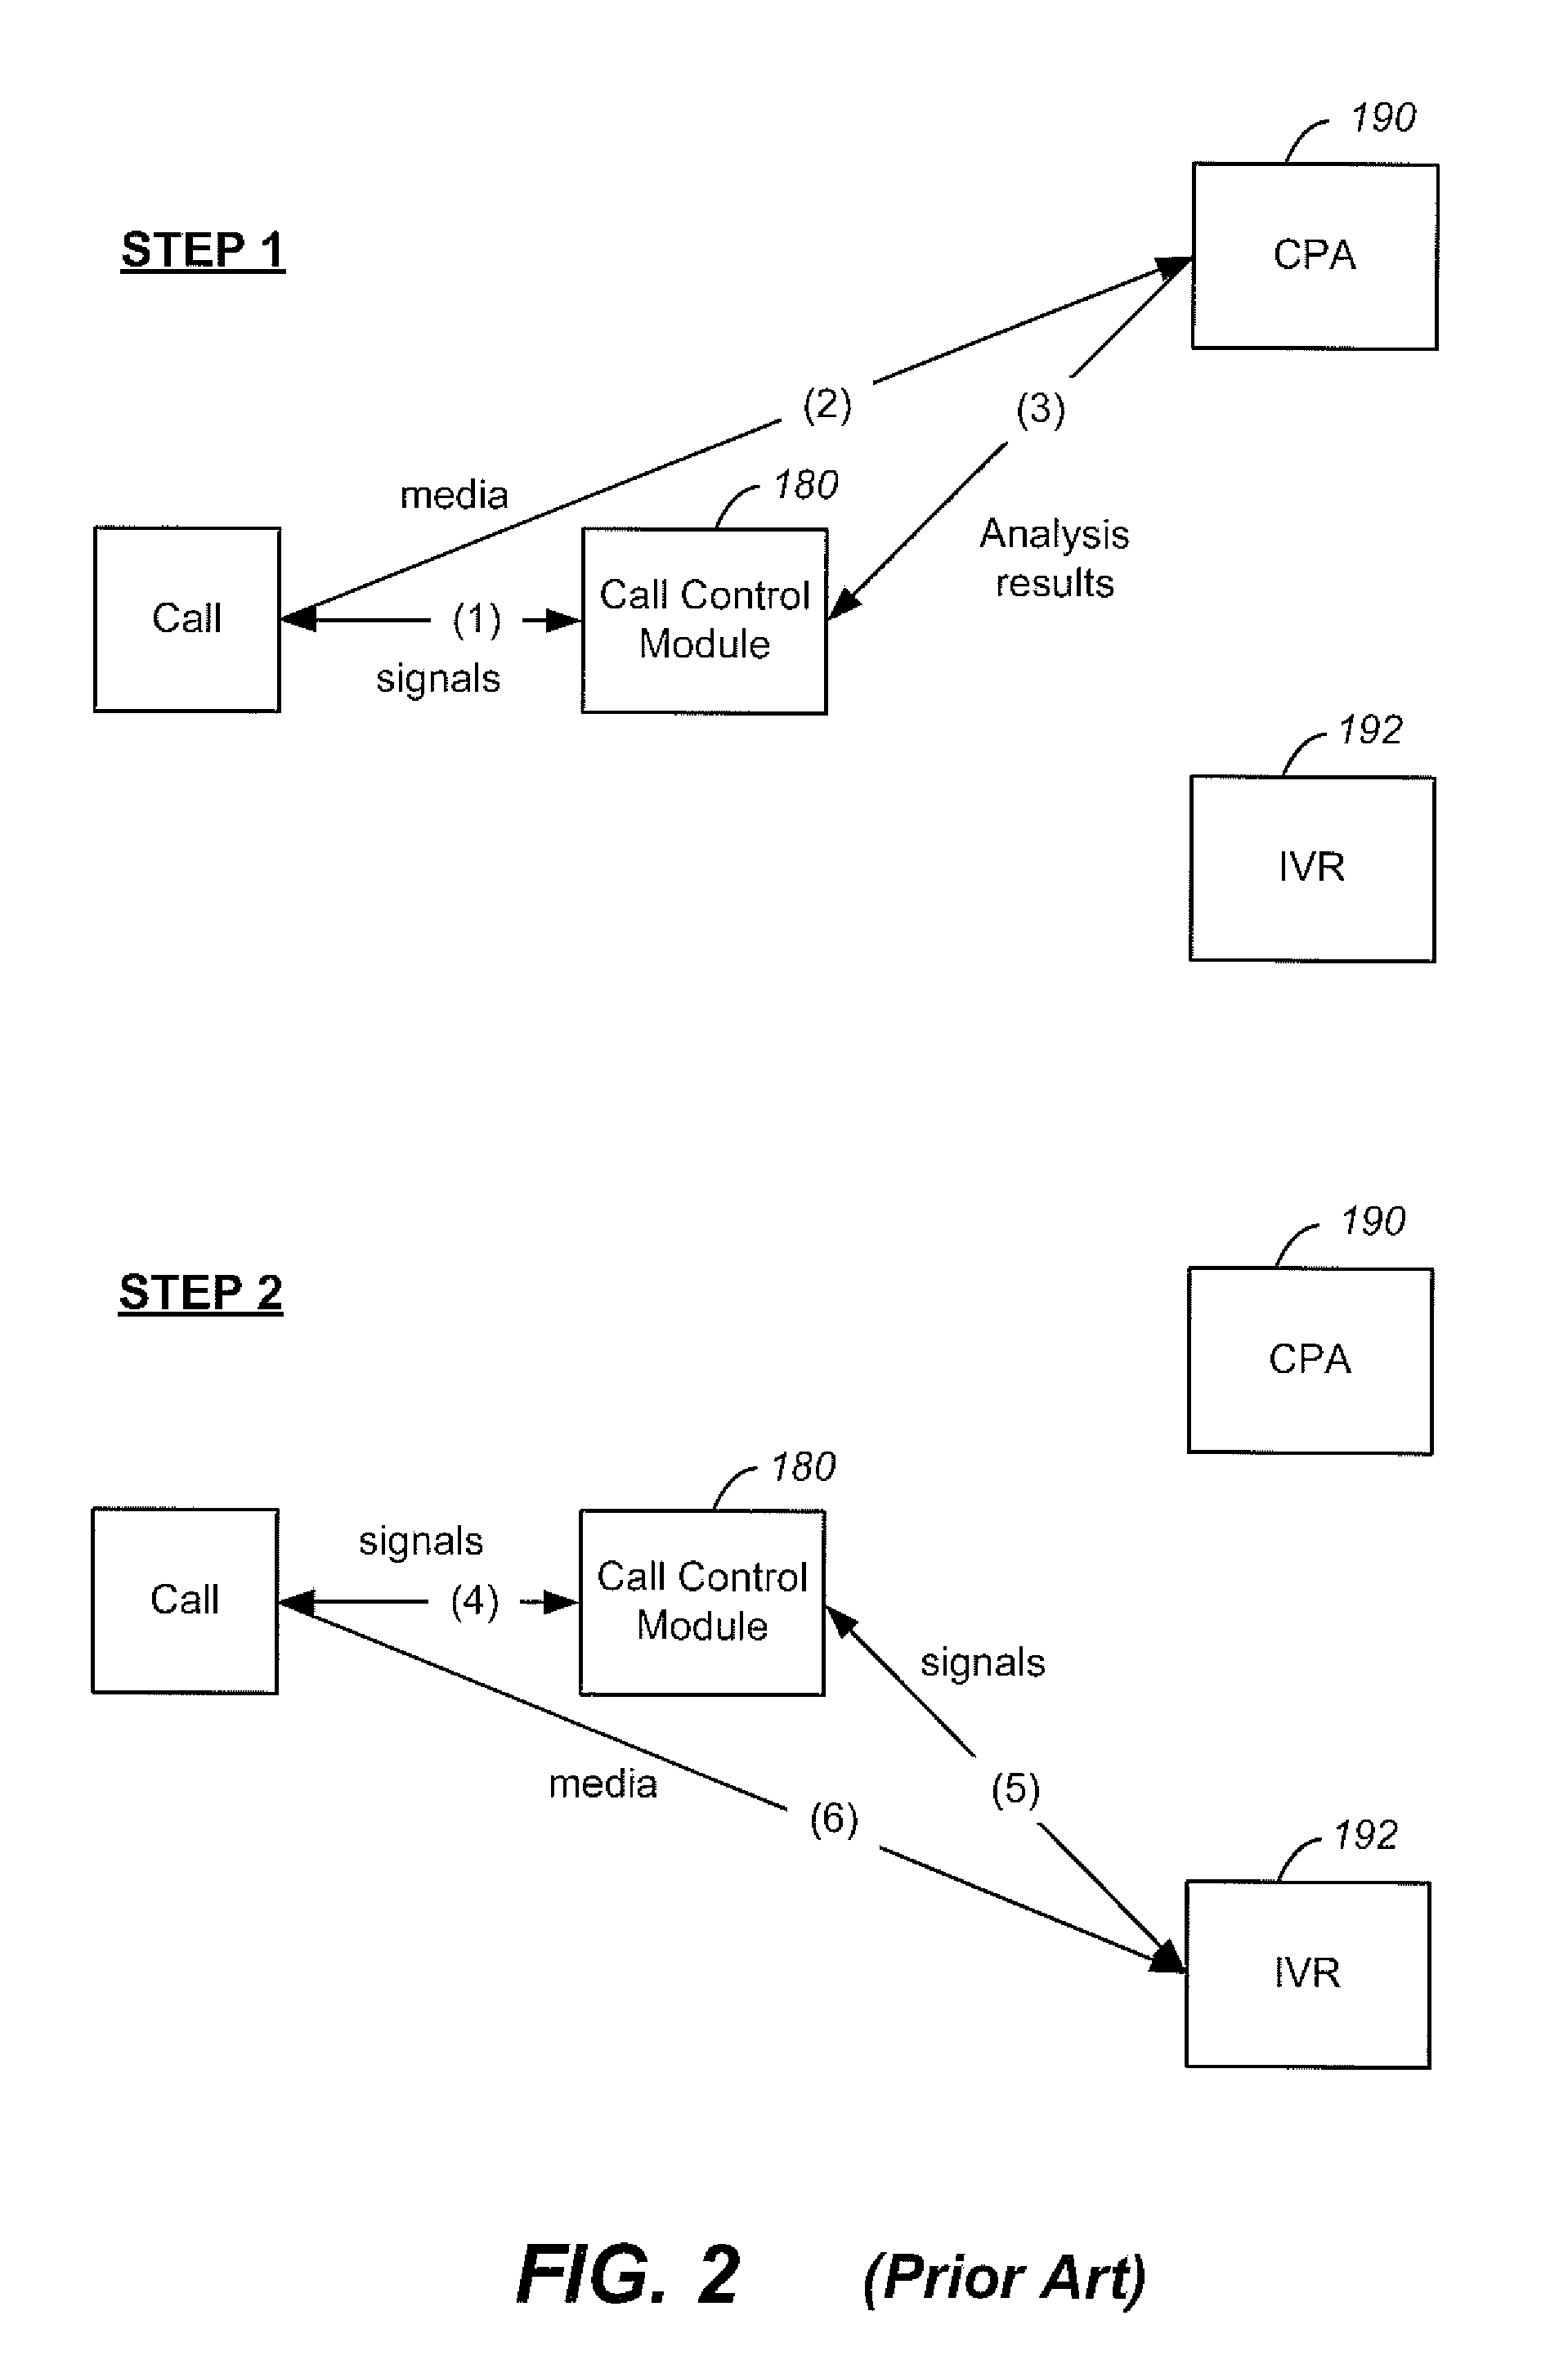 System and Method for Dynamic Call-Progress Analysis and Call Processing